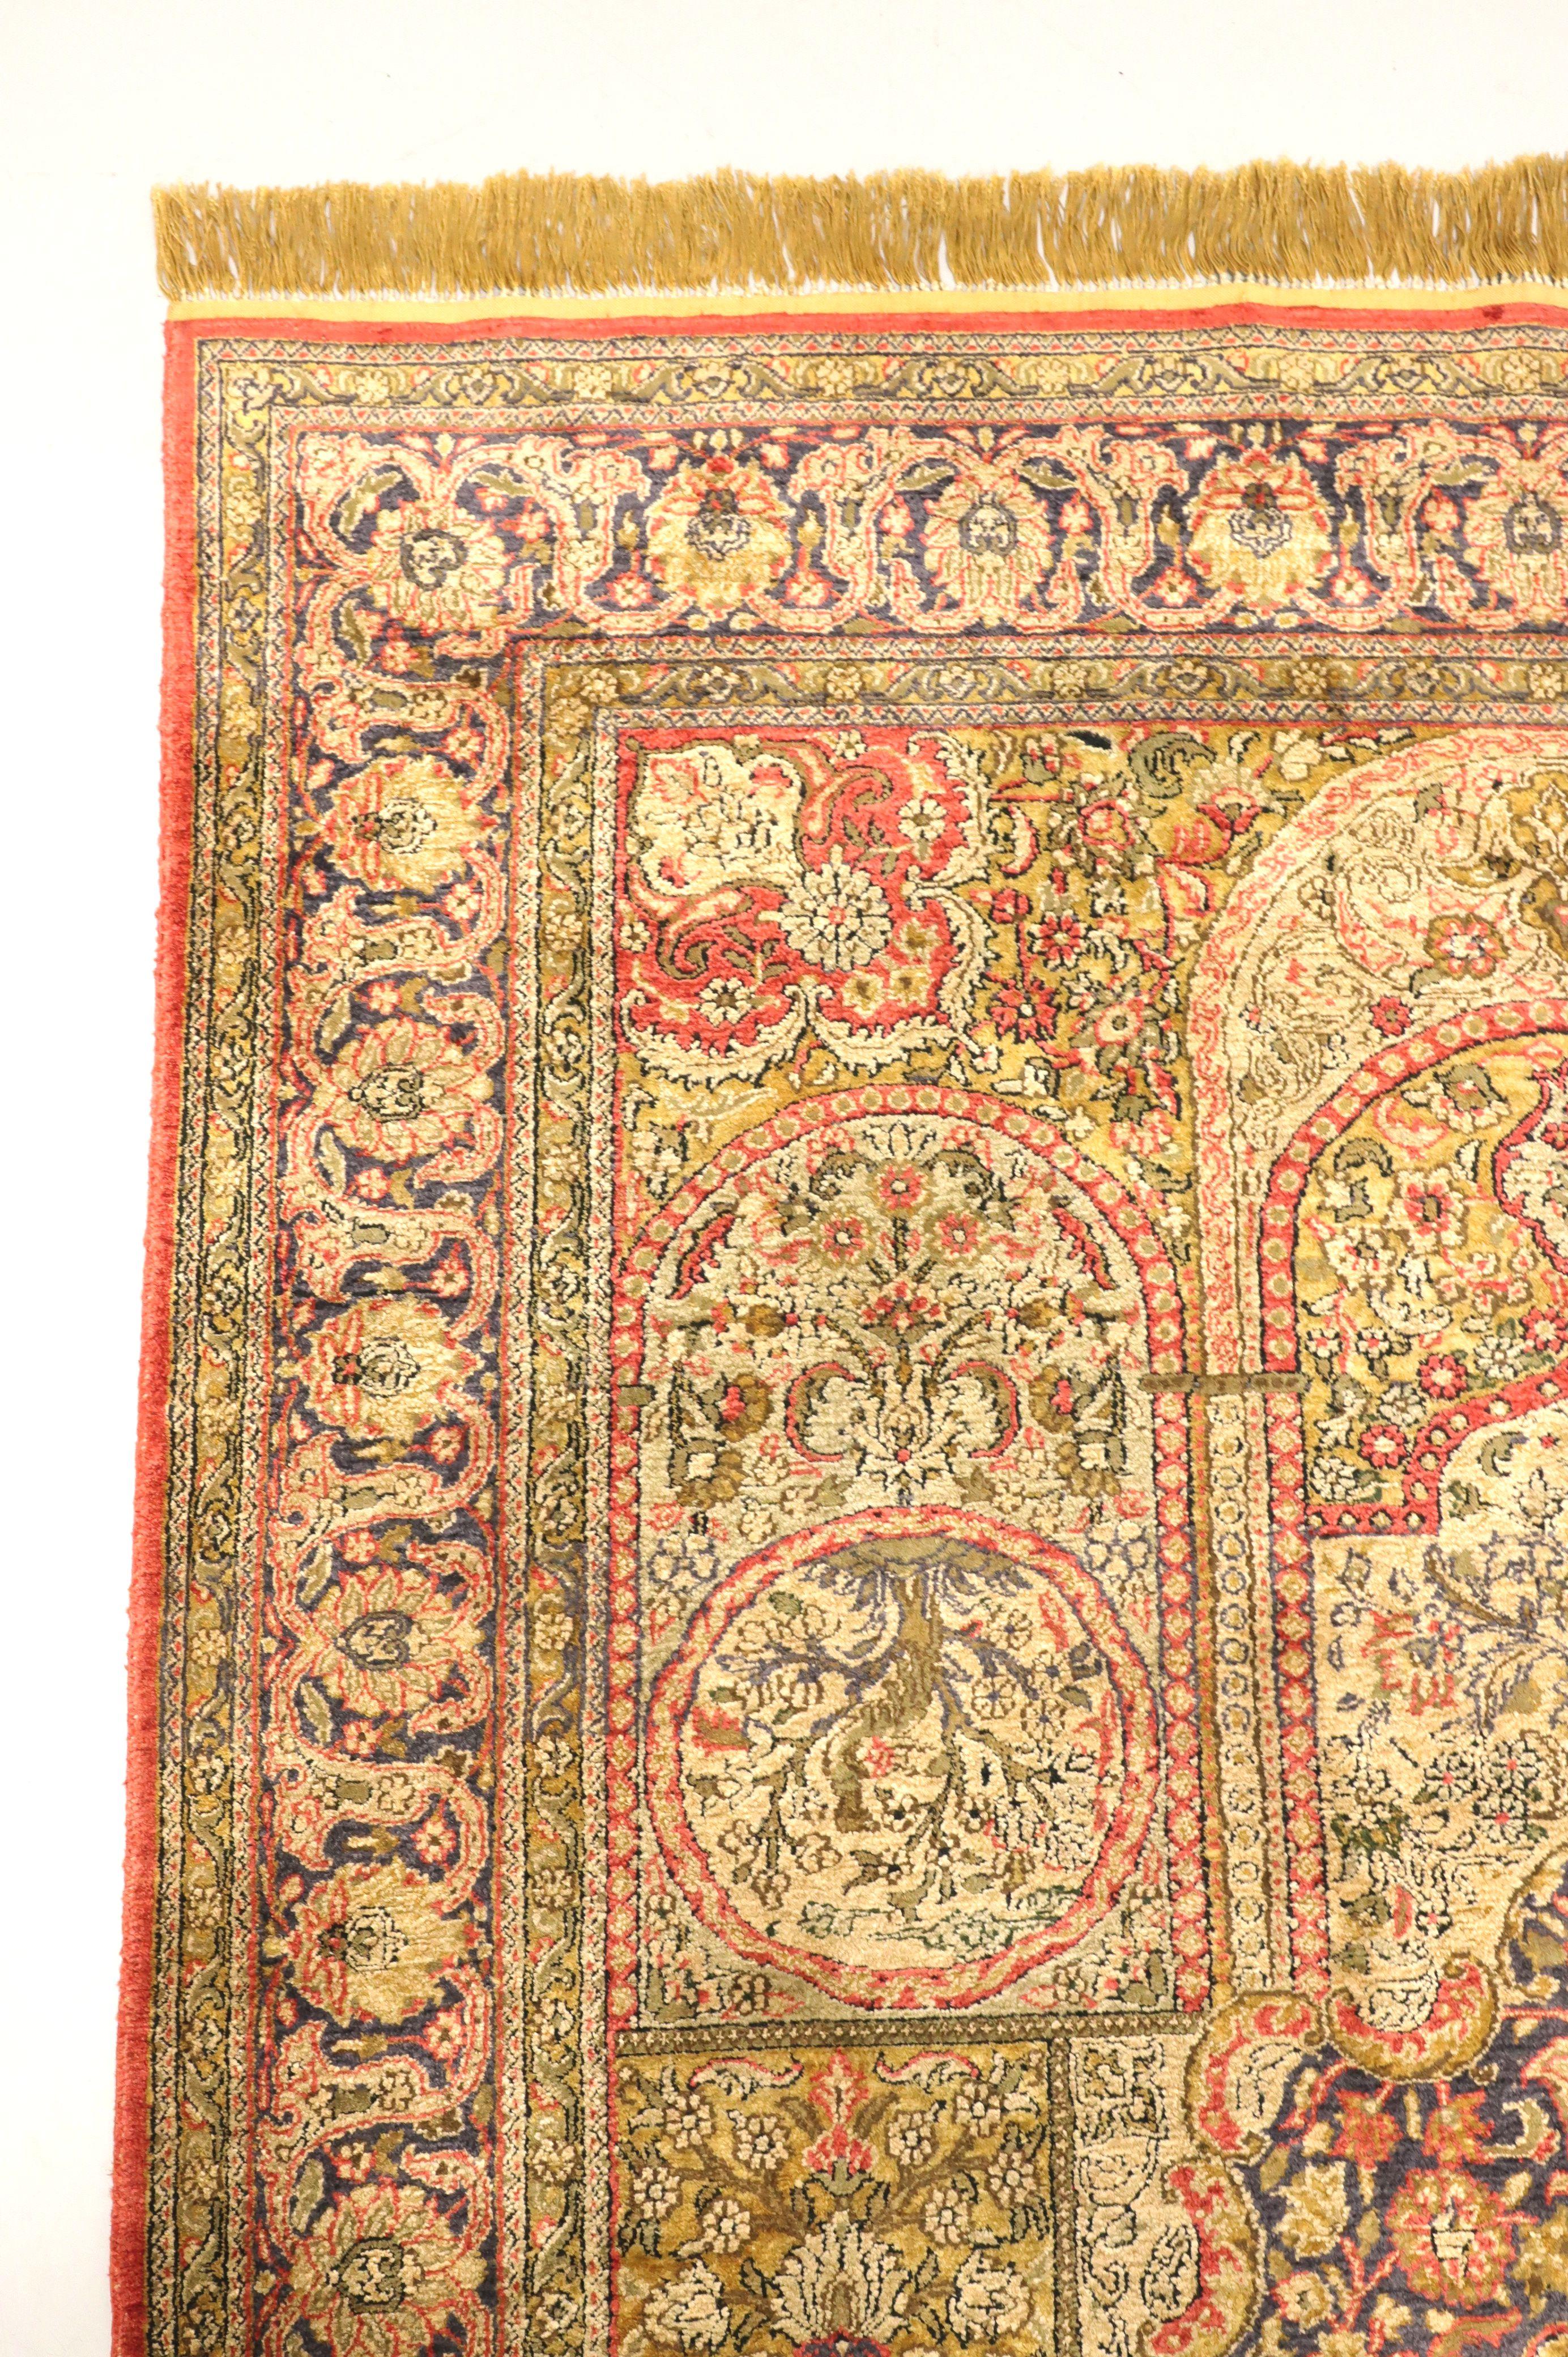 A Traditional Oriental style area rug, unbranded. Hand-knotted of high-quality silk and wool. Multi-color, primarily shades of red & gold, consisting of a distinctive design, and fringed ends. Origin unknown, likely Asia, from the late 20th